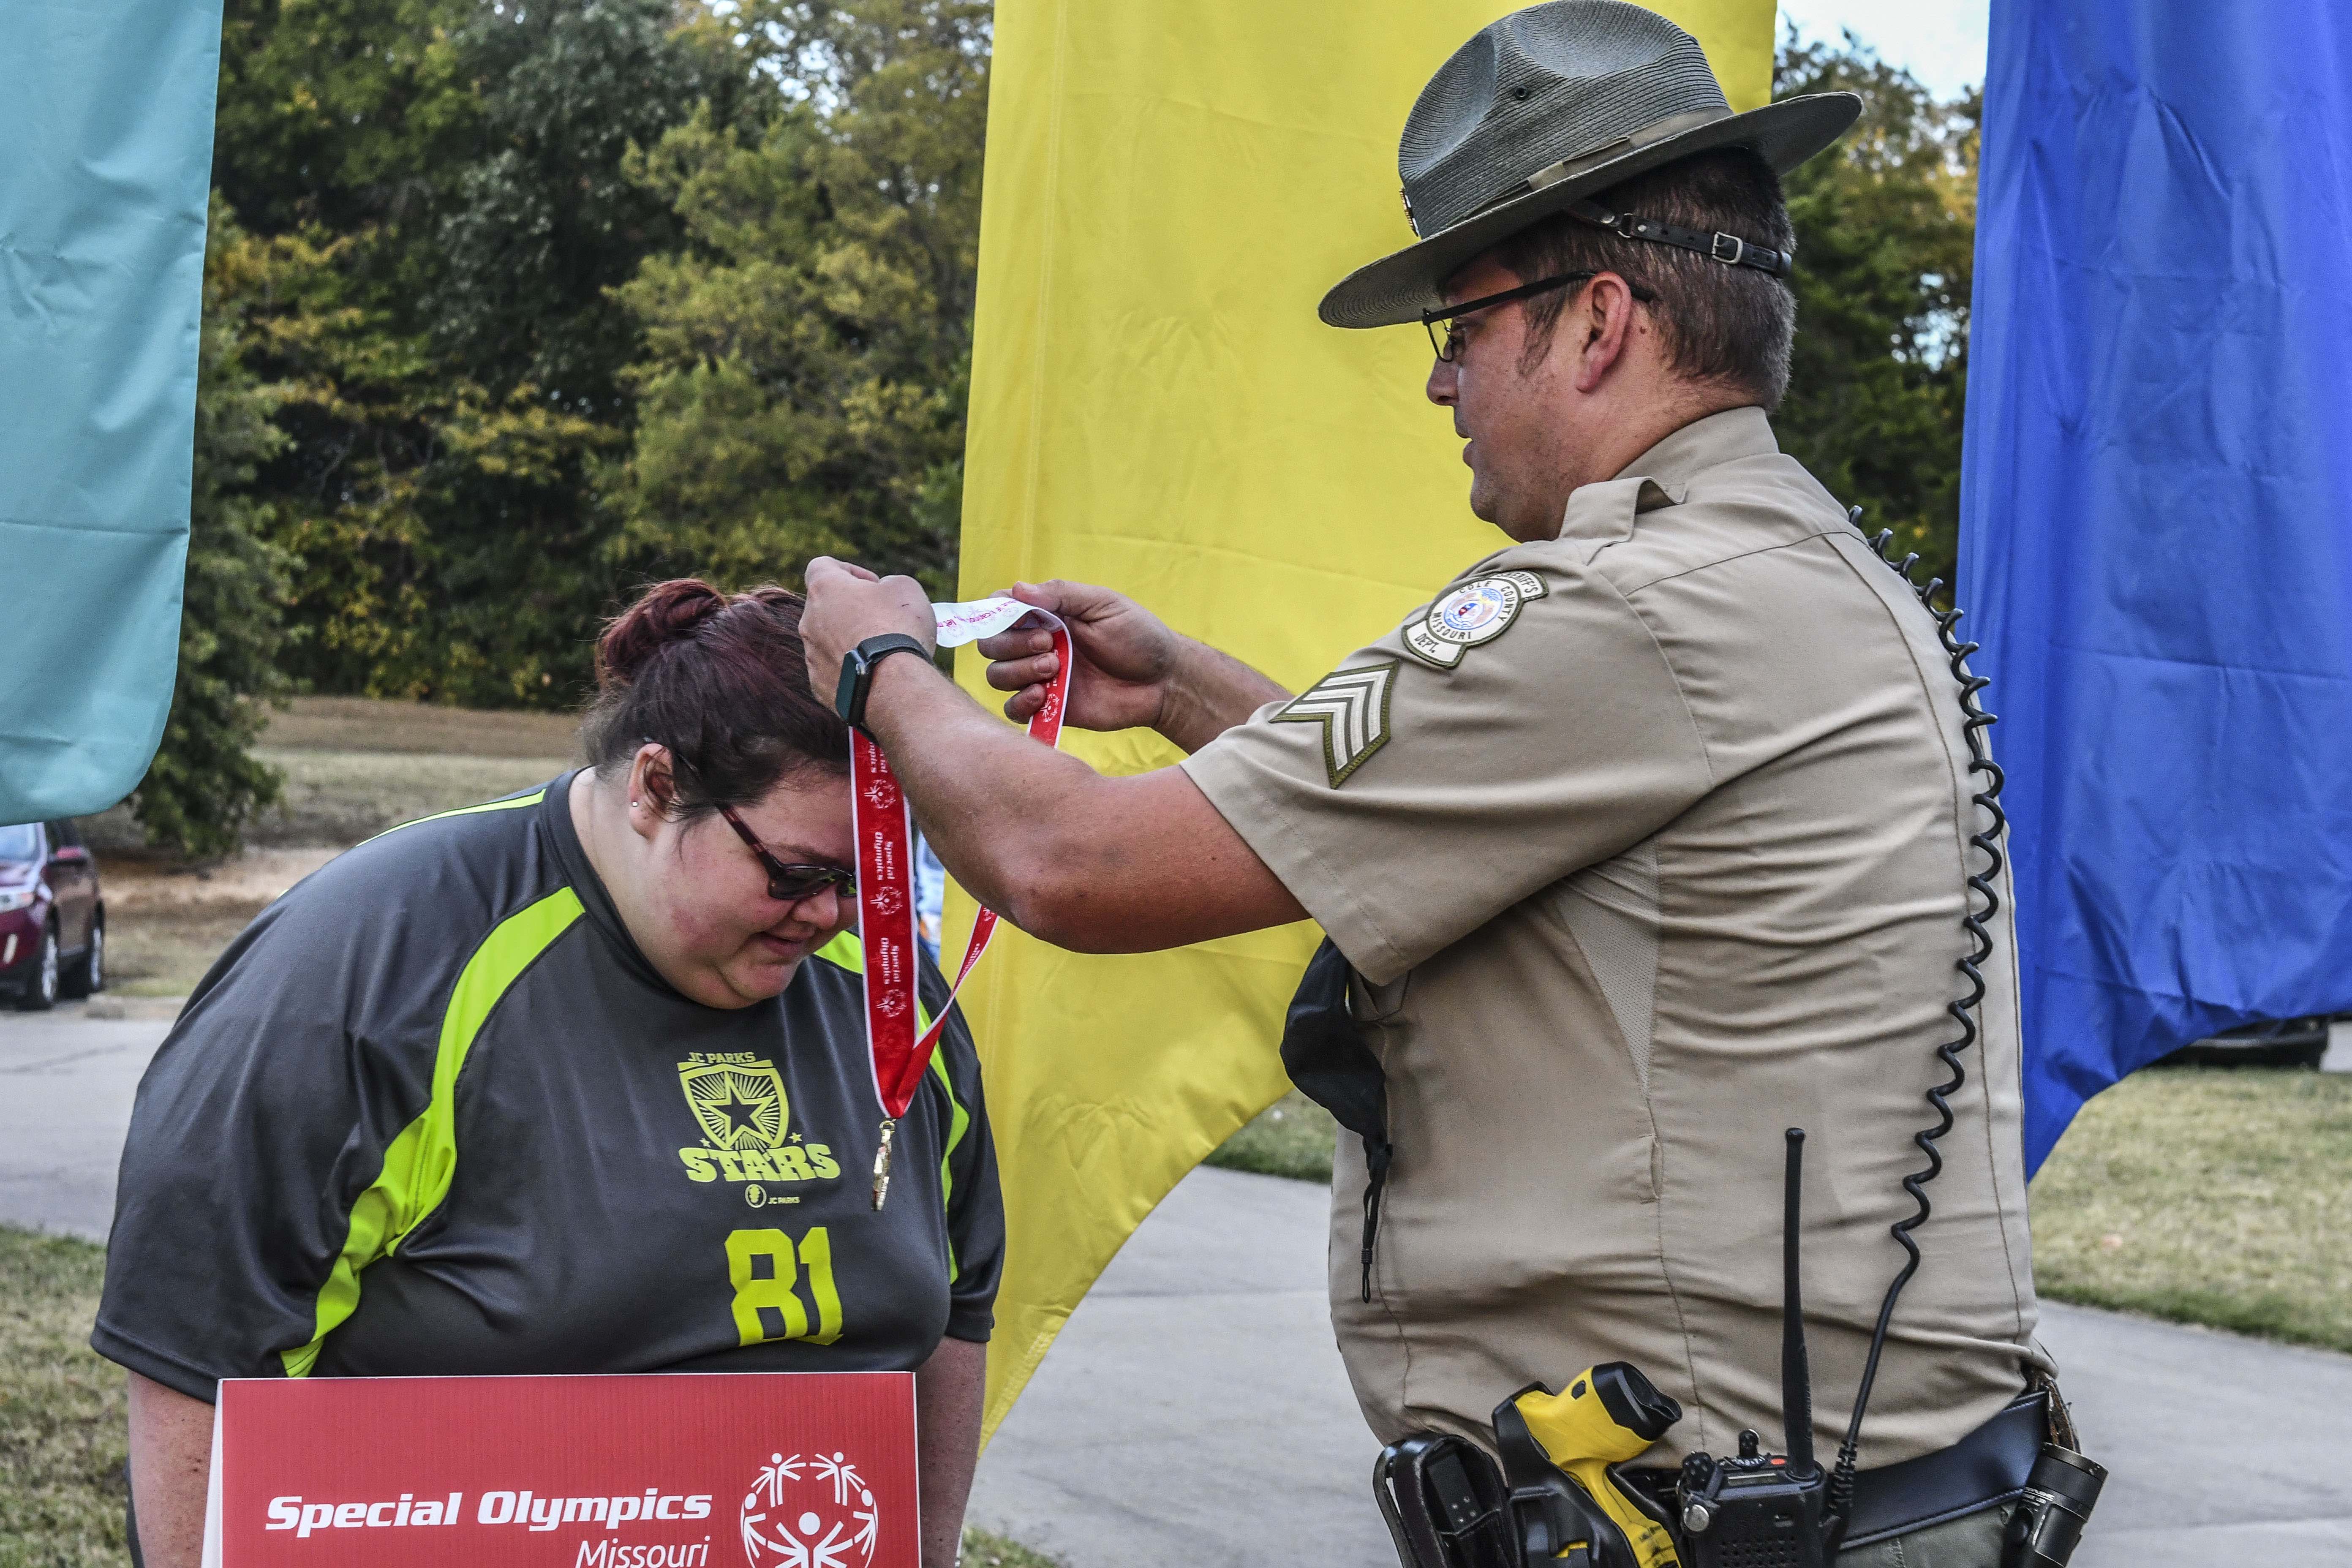 A law enforcement member hands out a medal to a Special Olympics Missouri athlete during the 2022 State Outdoor Games in Jefferson City, Mo.